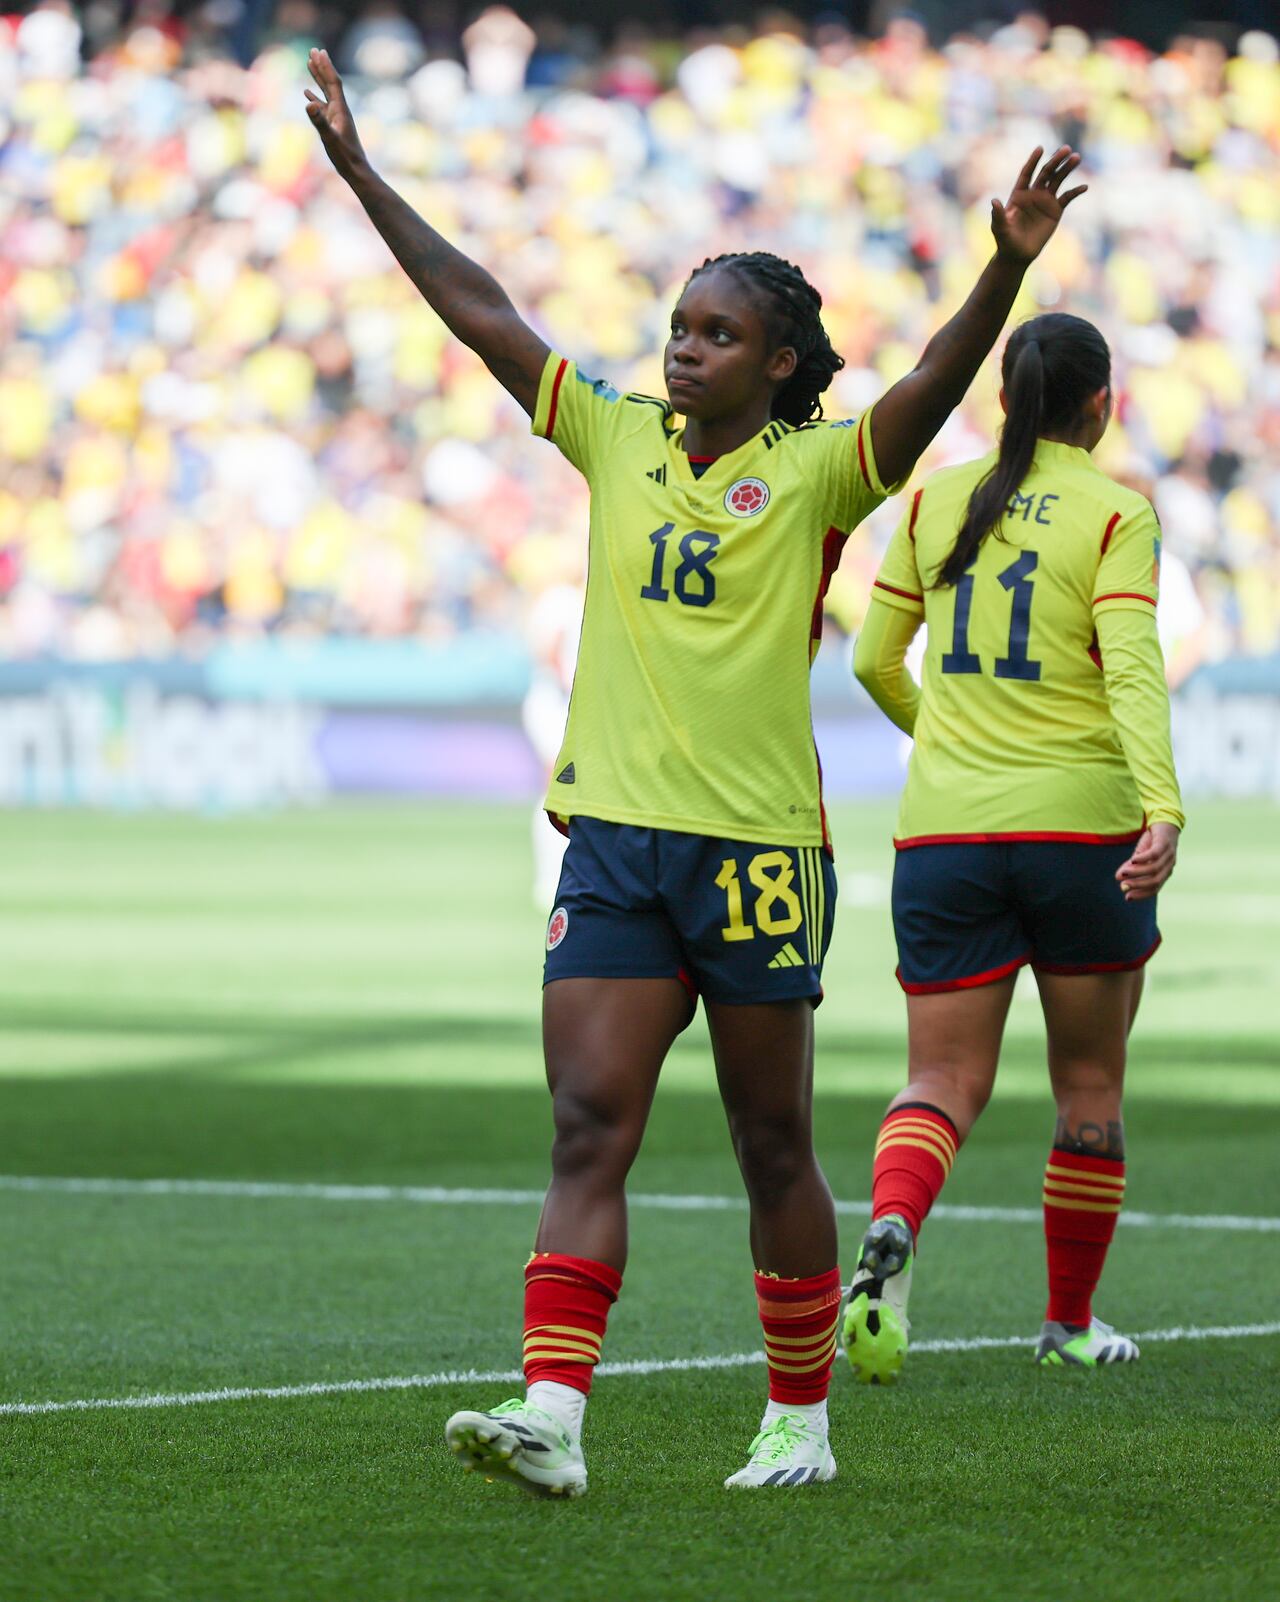 Colombia's Linda Caicedo reacts after scoring her first goal during the Women's World Cup Group H soccer match between Colombia and South Korea at Sydney Football Stadium in Sydney, Australia, Tuesday, July 25, 2023. (AP Photo/Sophie Ralph)